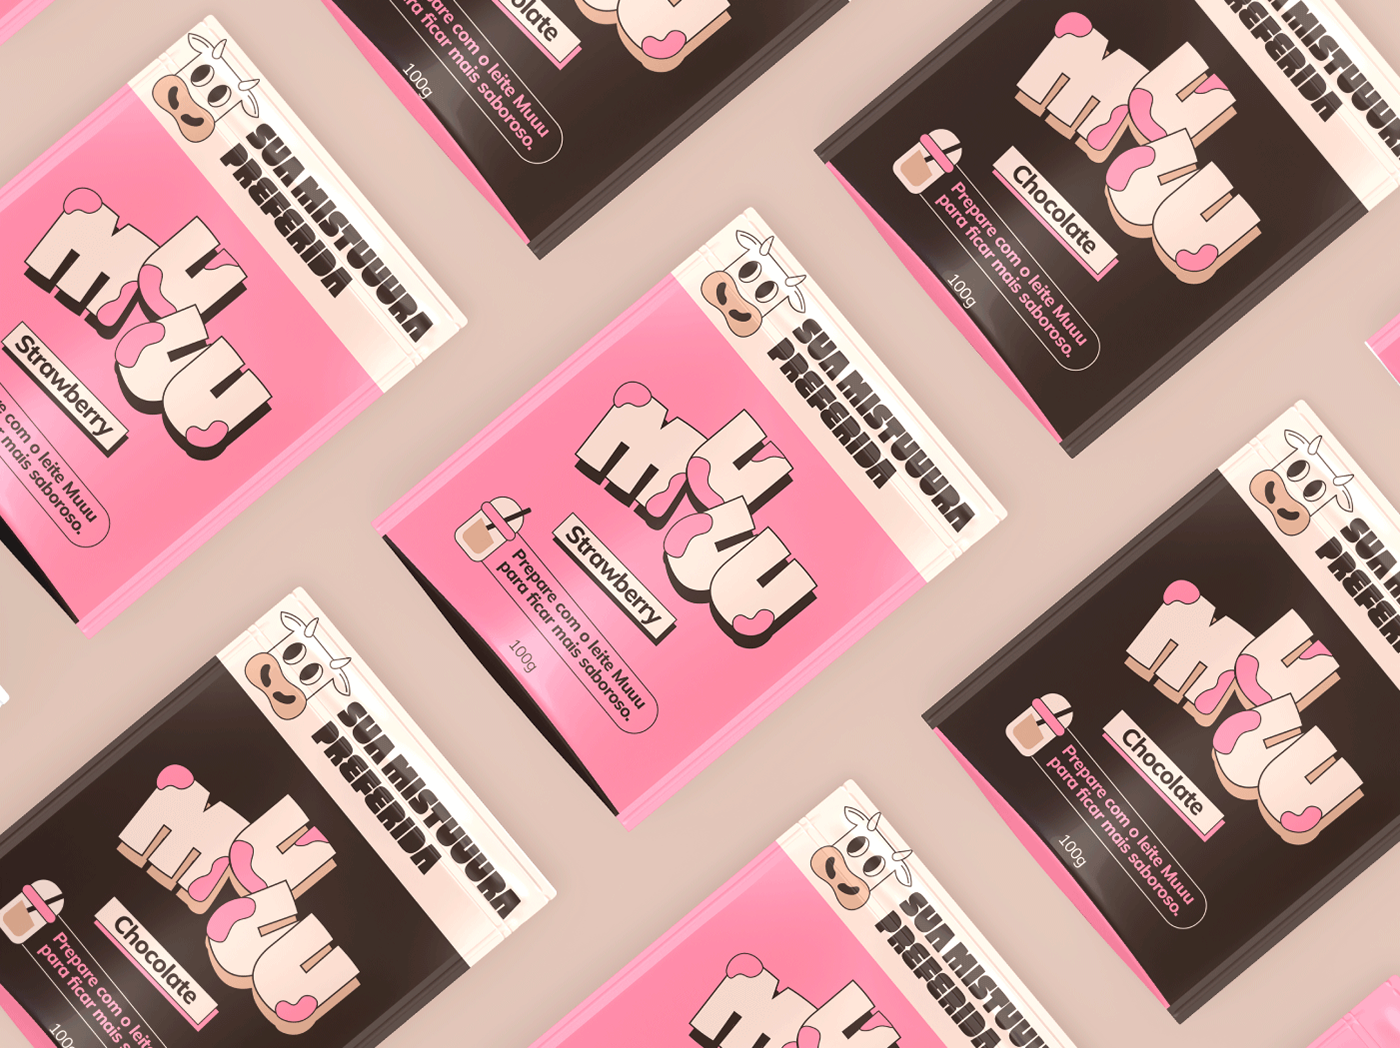 Artifact from the Experience Delight: Muuu Packaging Design & Visual Identity article on Abduzeedo